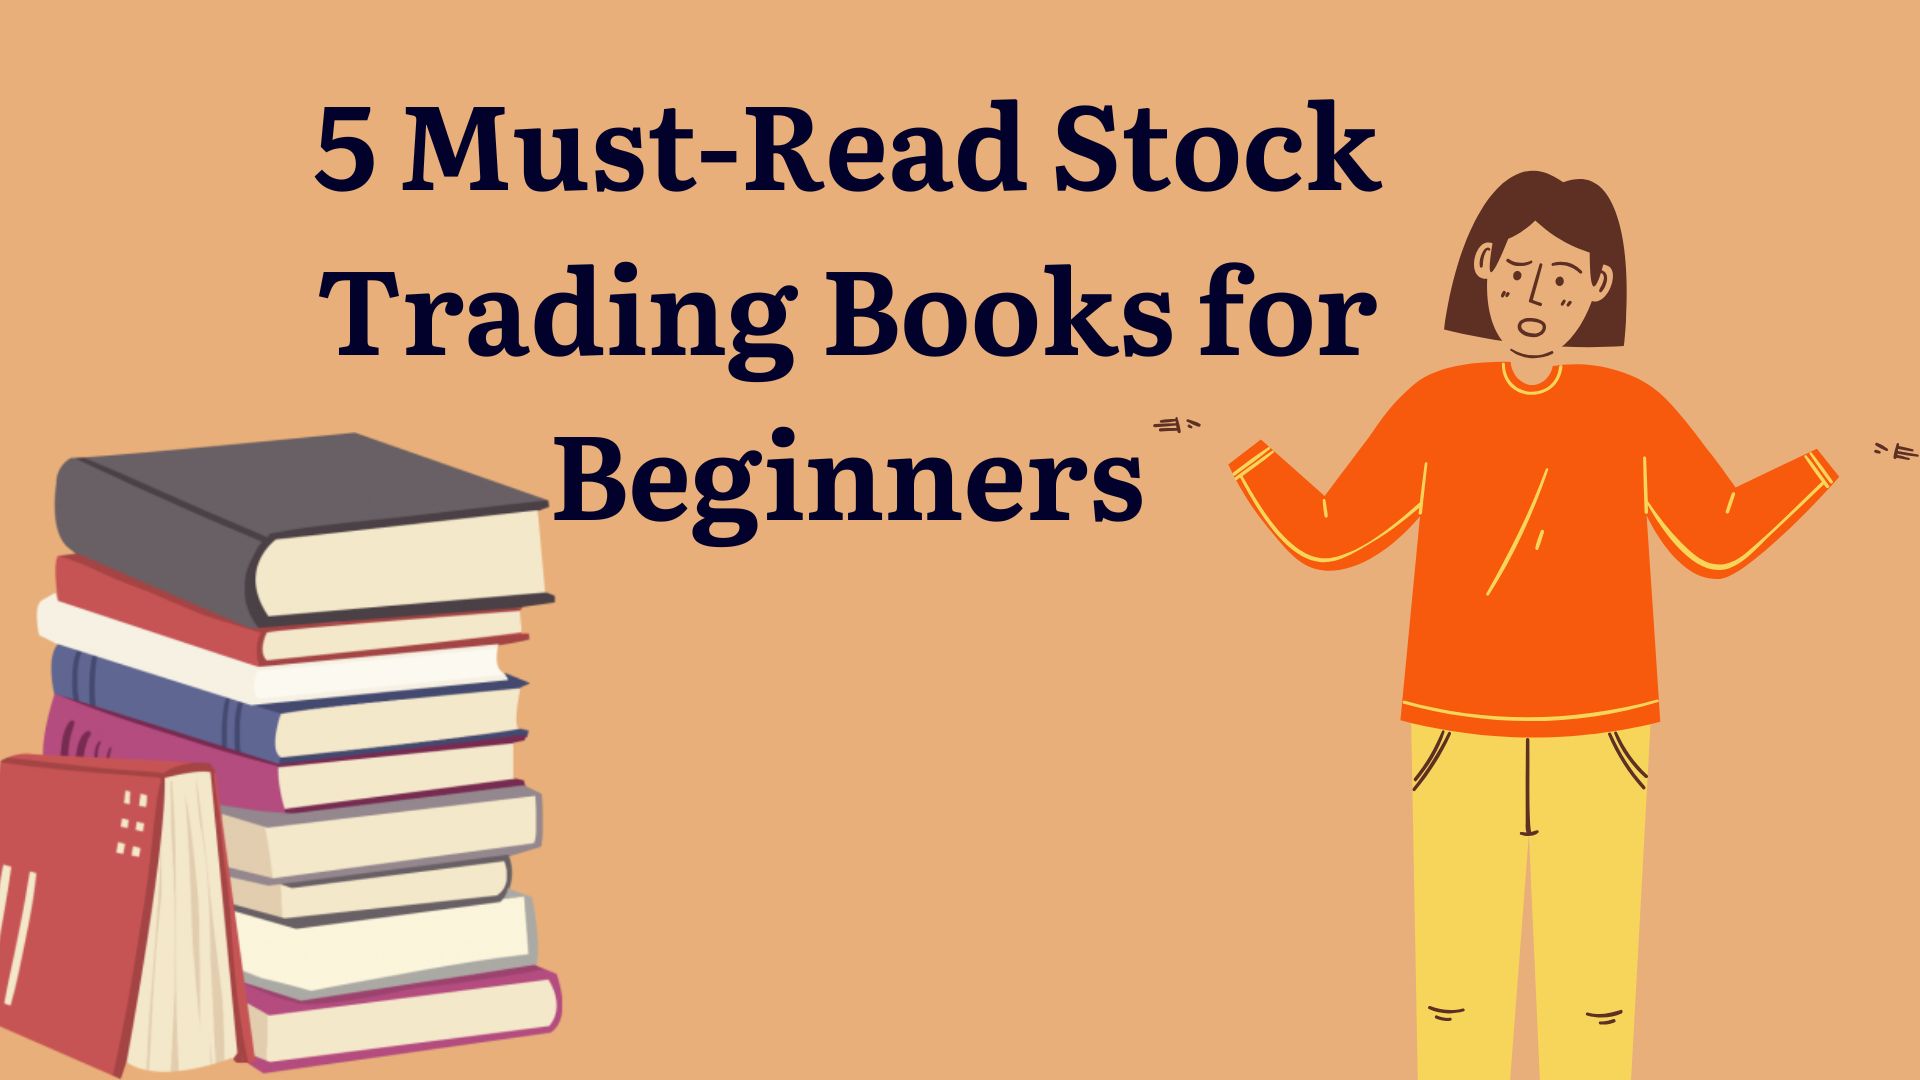 5 Must-Read Stock Trading Books for Beginners